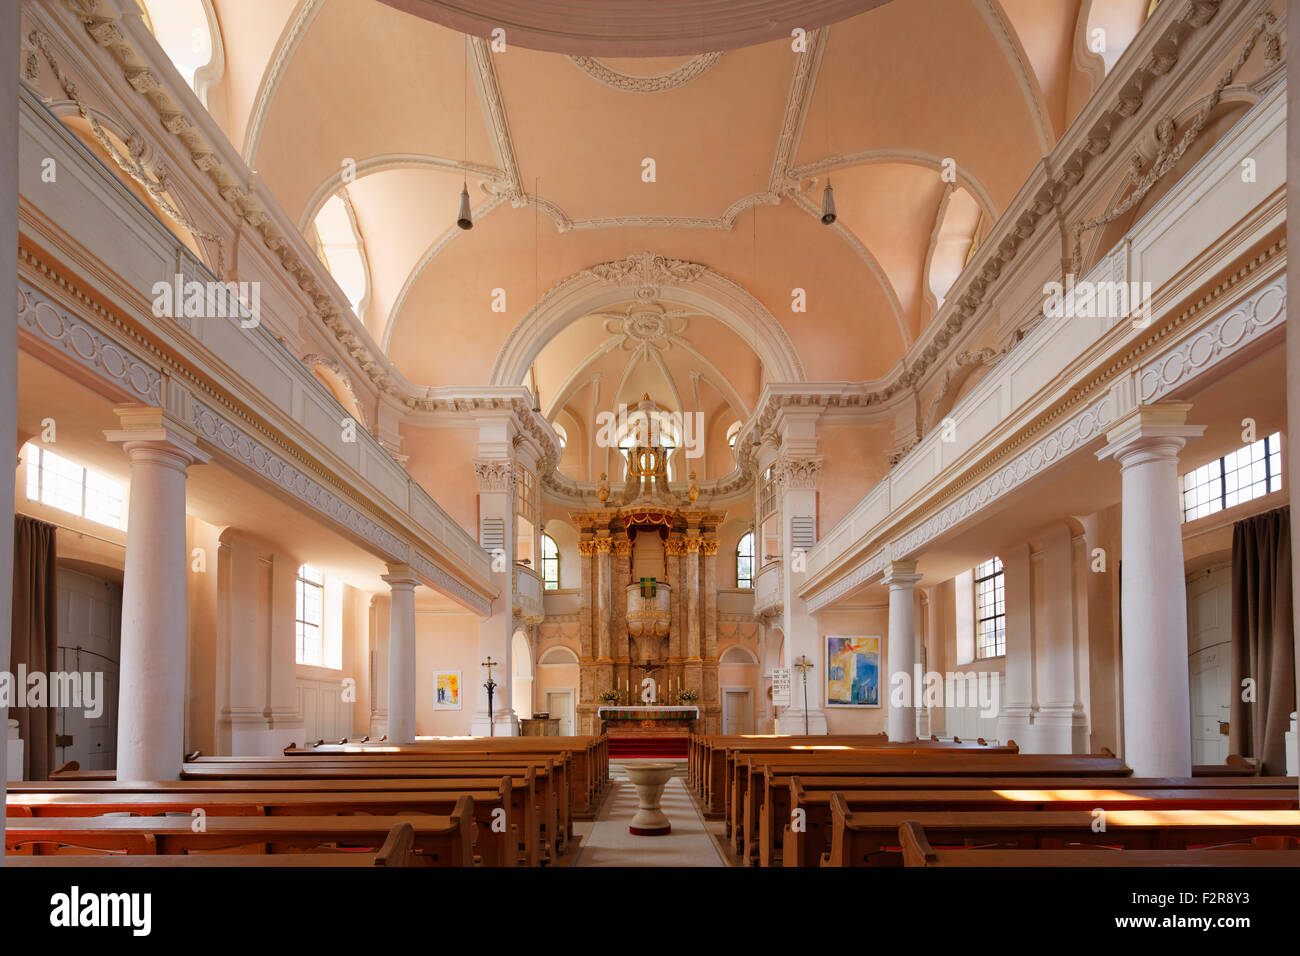 Church of St. John with the pulpit altar, Castell, Mainfranken, Lower Franconia, Franconia, Bavaria, Germany Stock Photo